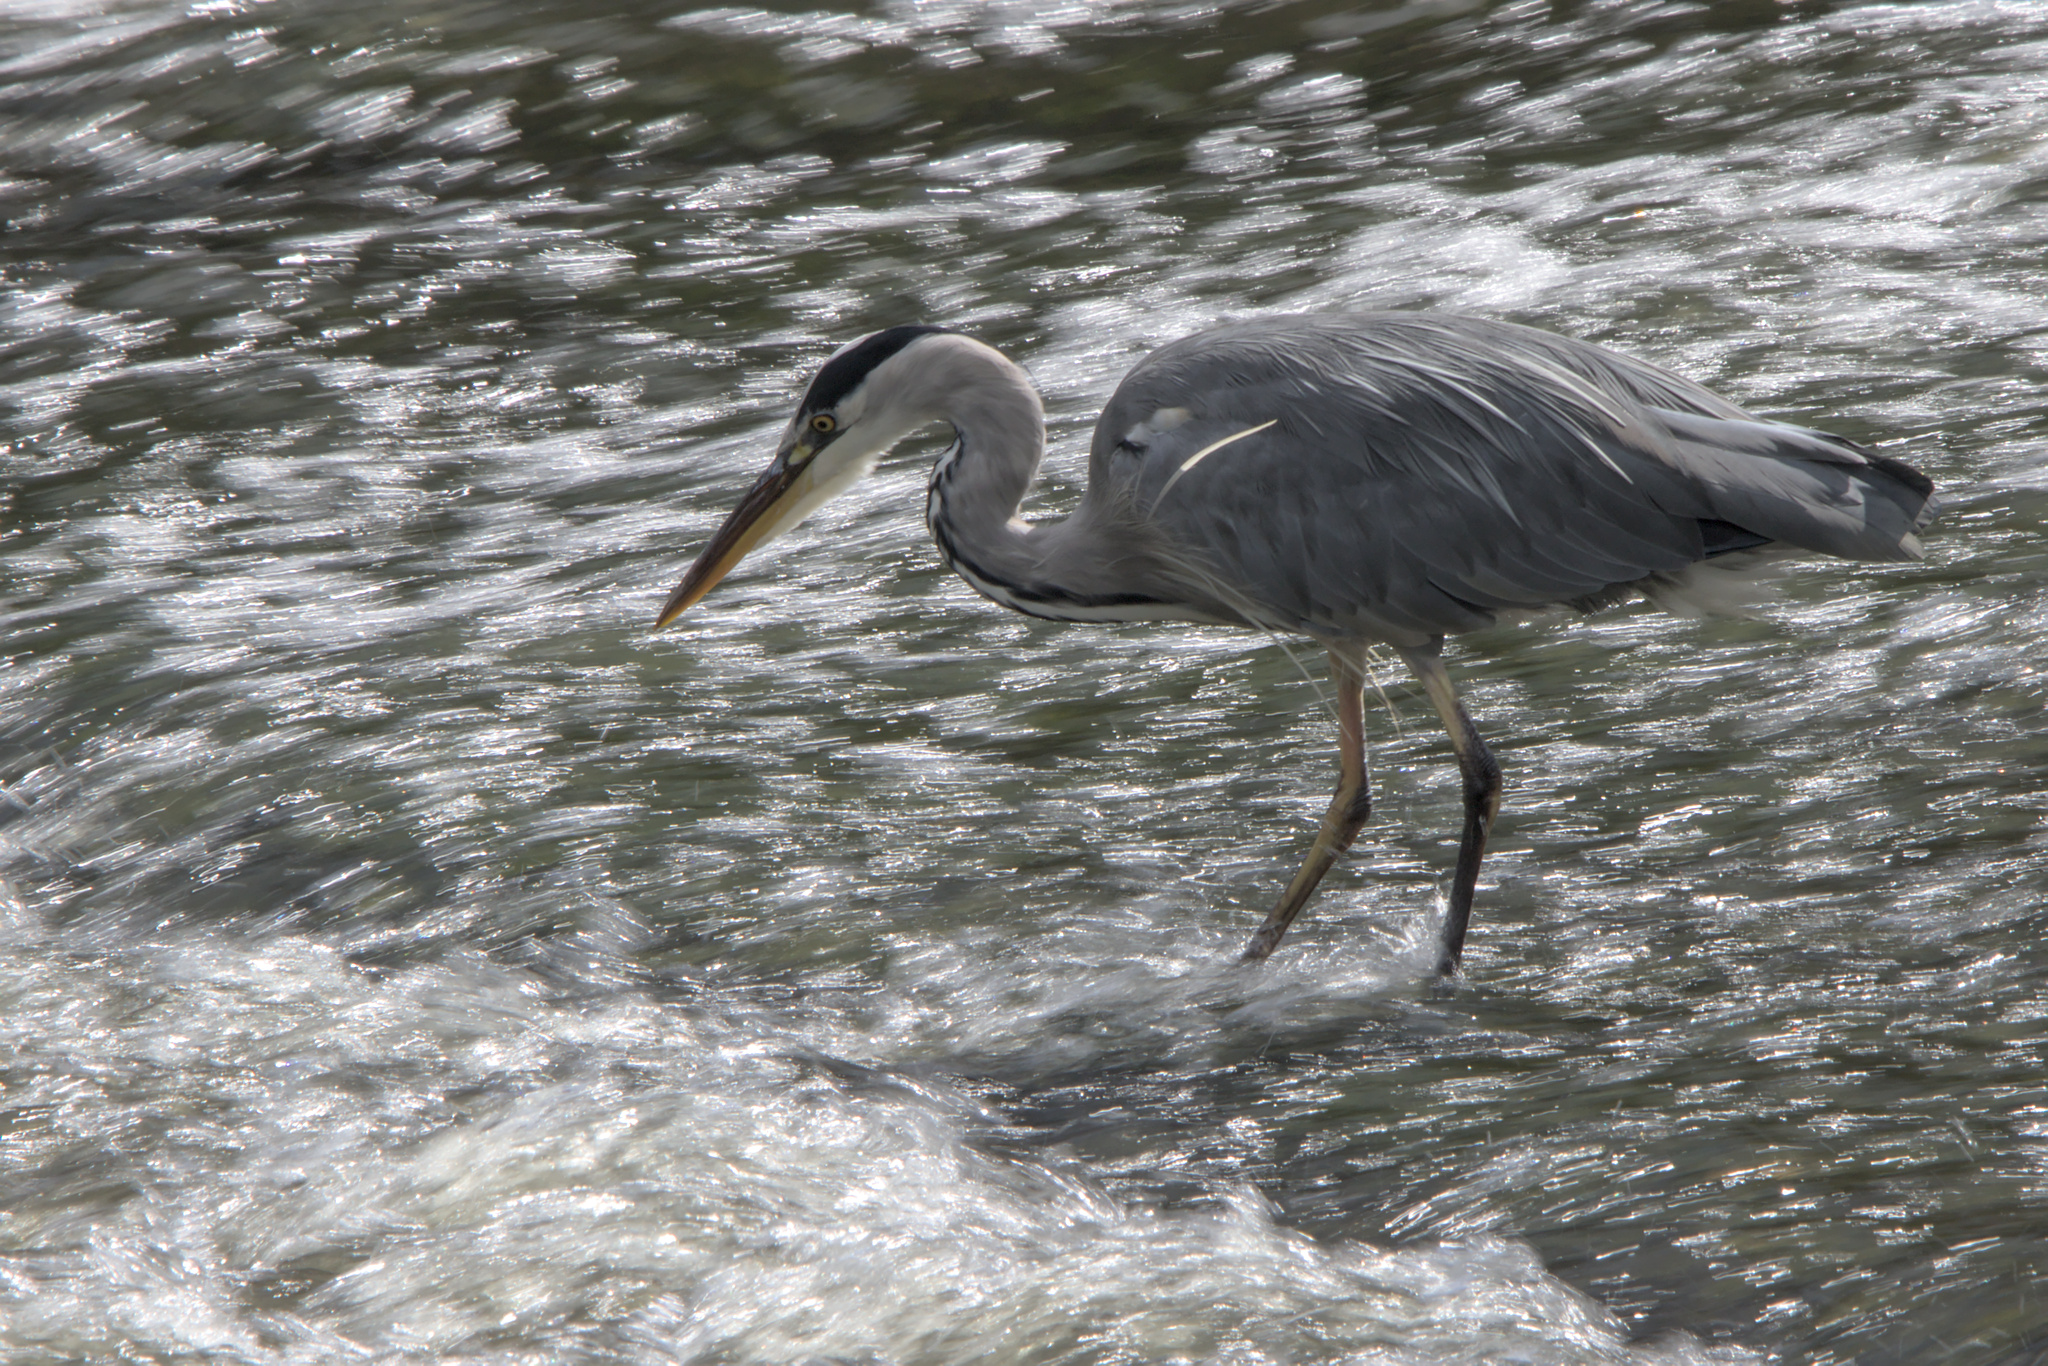 A Few More of a Heron at the Weir